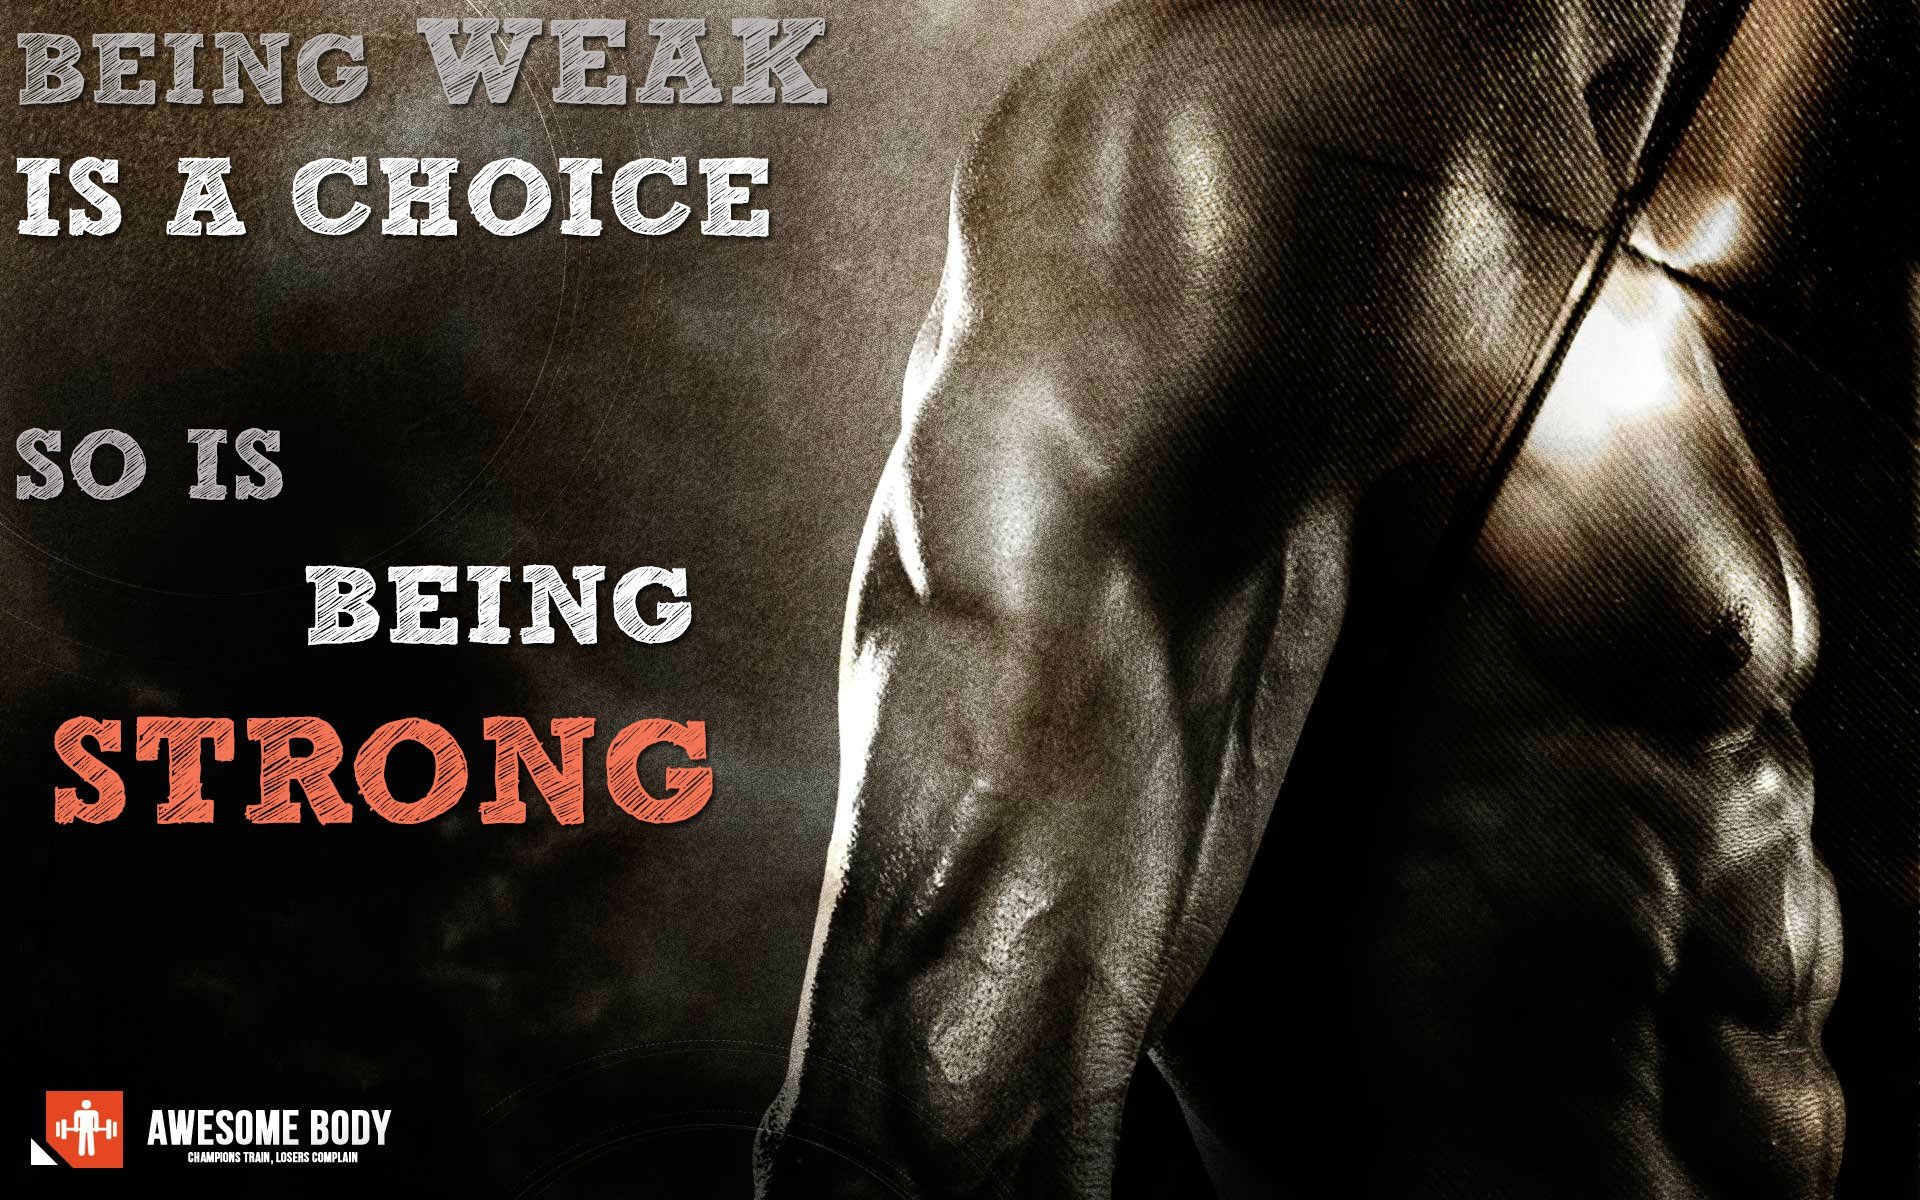 Bodybuilding Motivation Wallpaper HD Being strong is choice 1920x1200